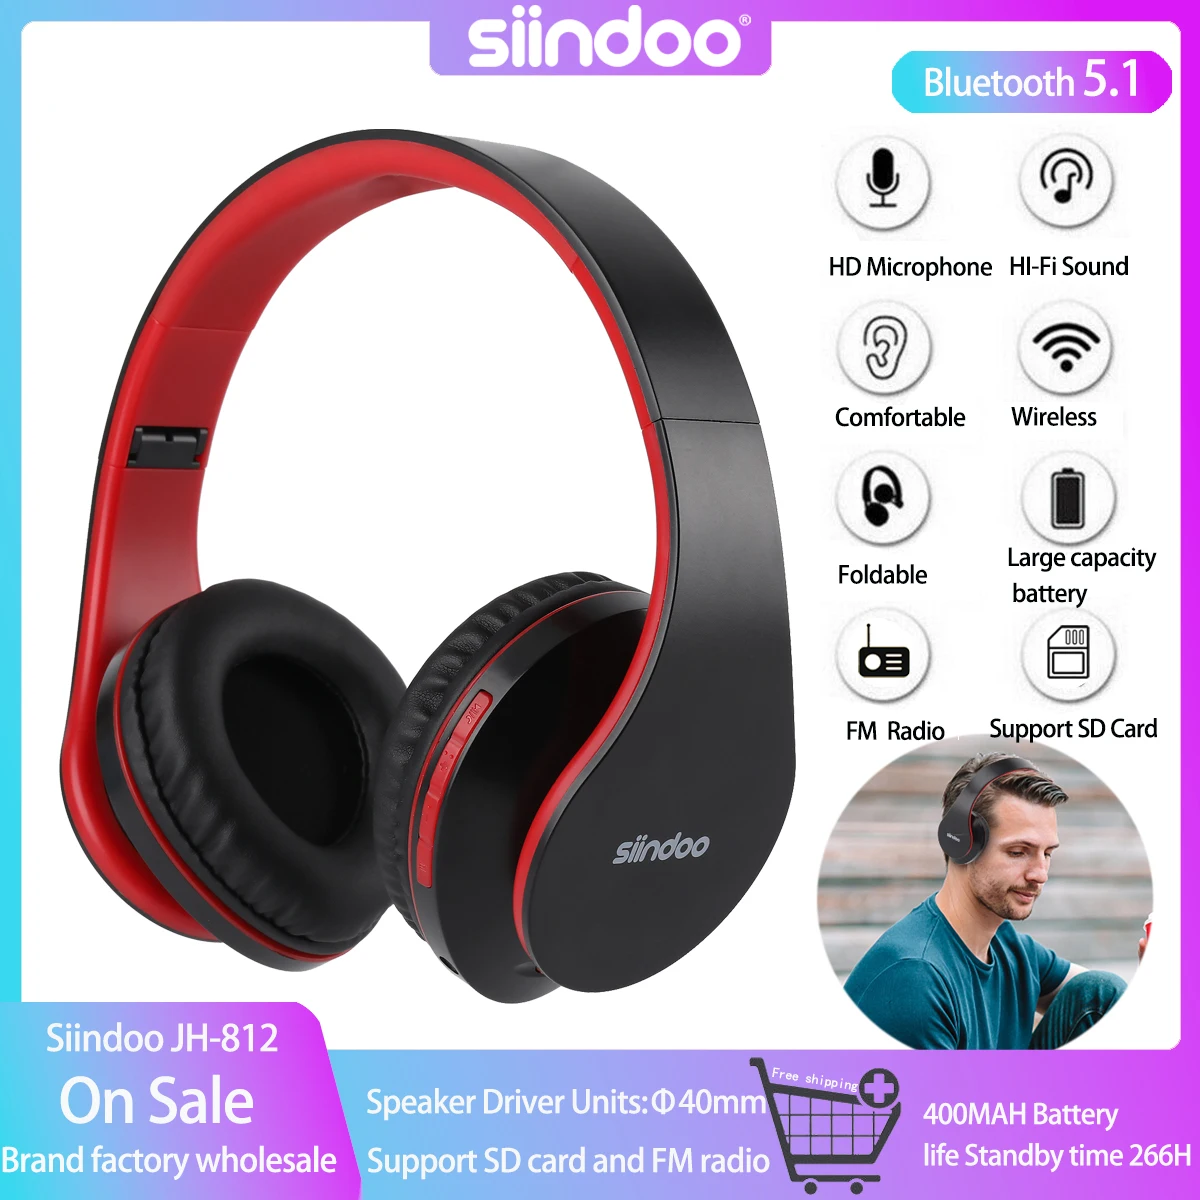 

Siindoo JH-812 Red Bluetooth Headphone Foldable Stereo Music Earphones FM and Support SD Card with Mic for Mobile Samsung PC TV